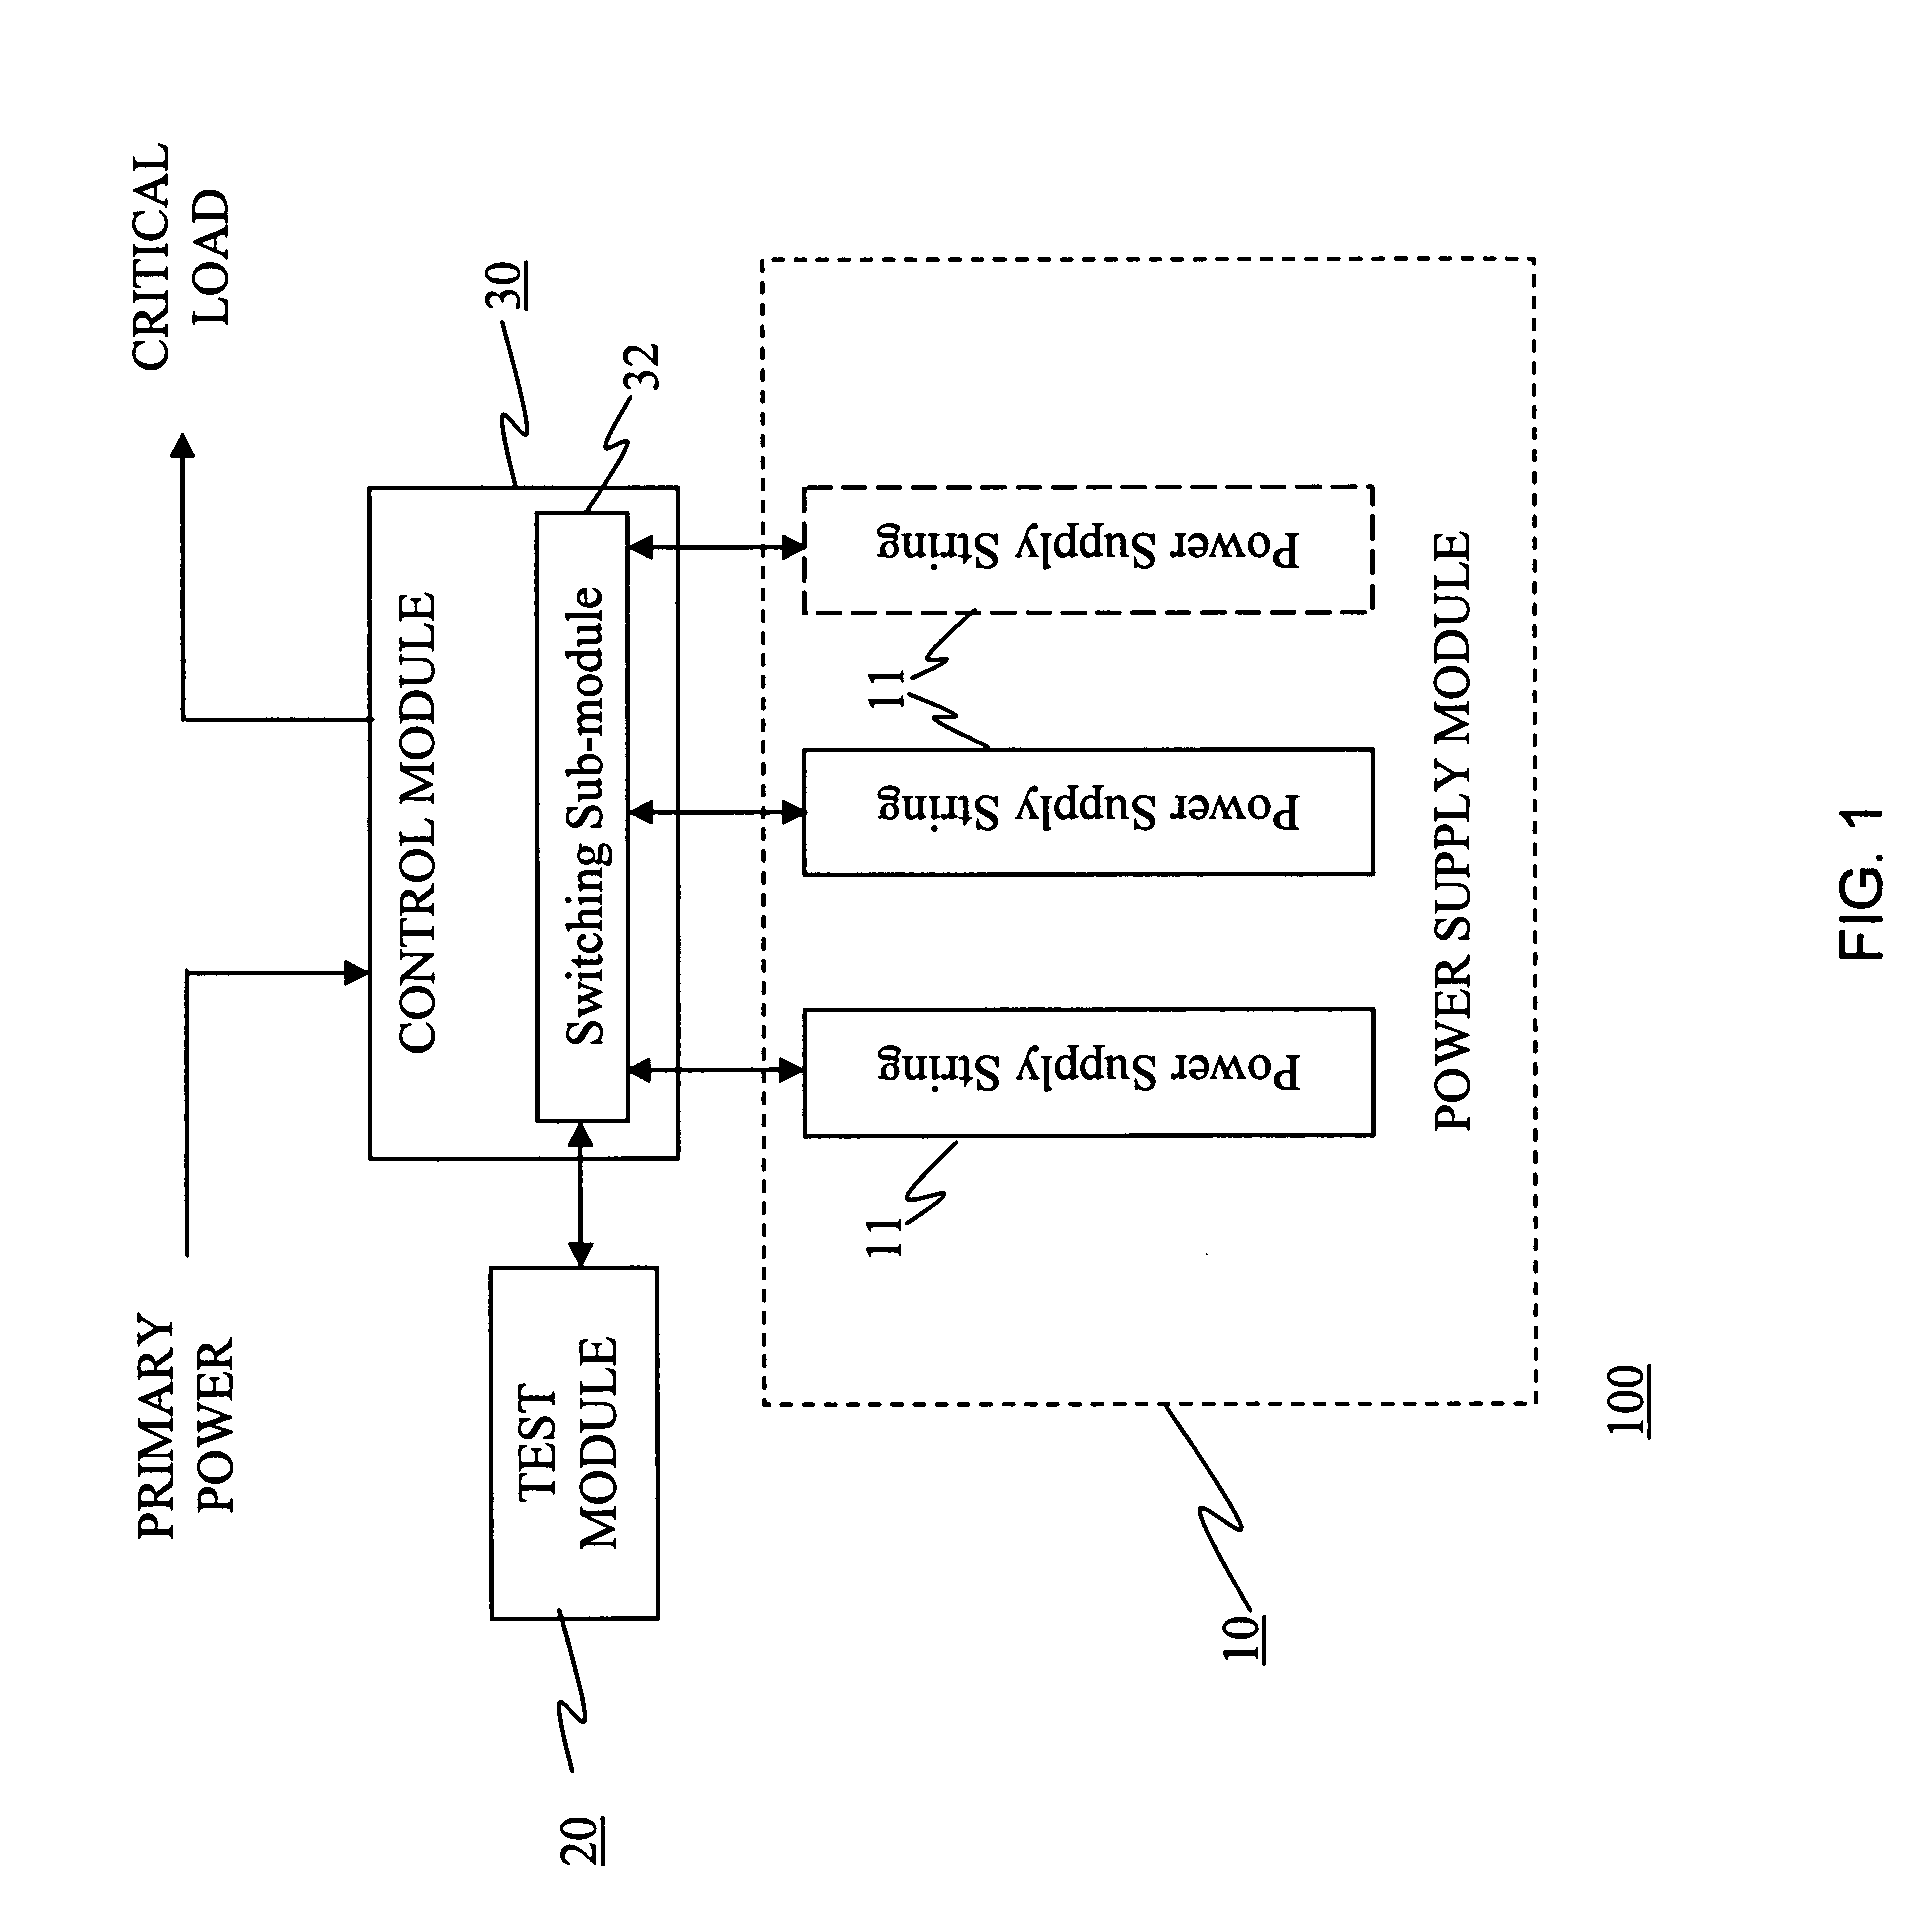 System and method for advanced power management